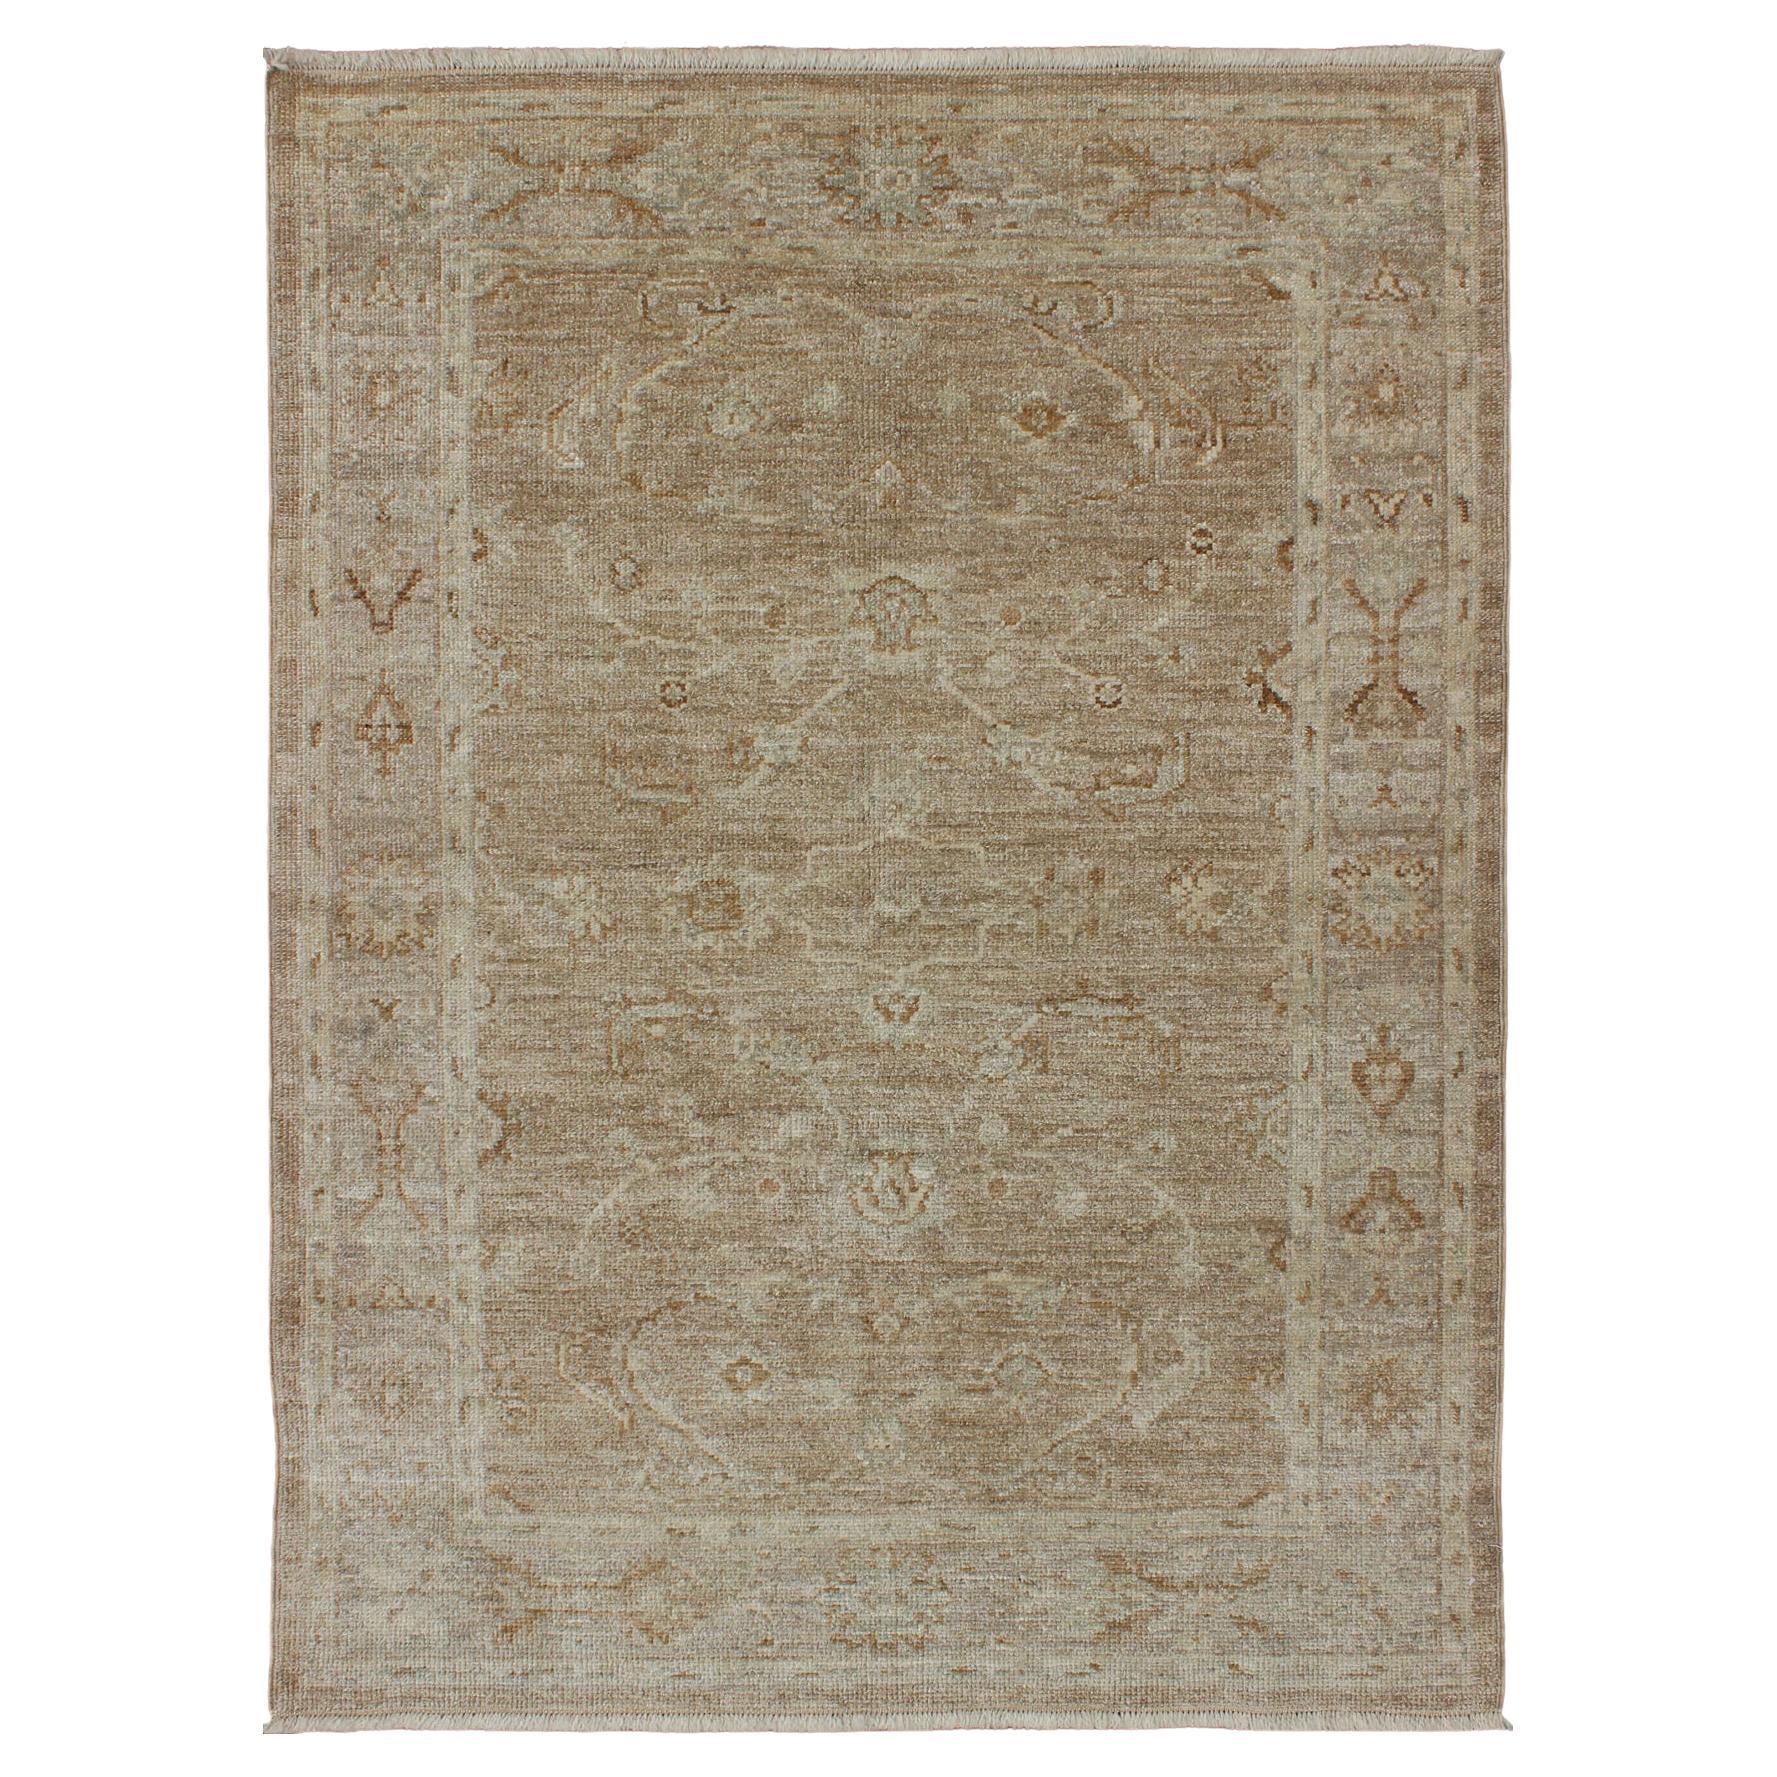 Angora Oushak Turkish Rug in Warm Colors by Keivan Woven Arts  4'1 x 5'8 For Sale